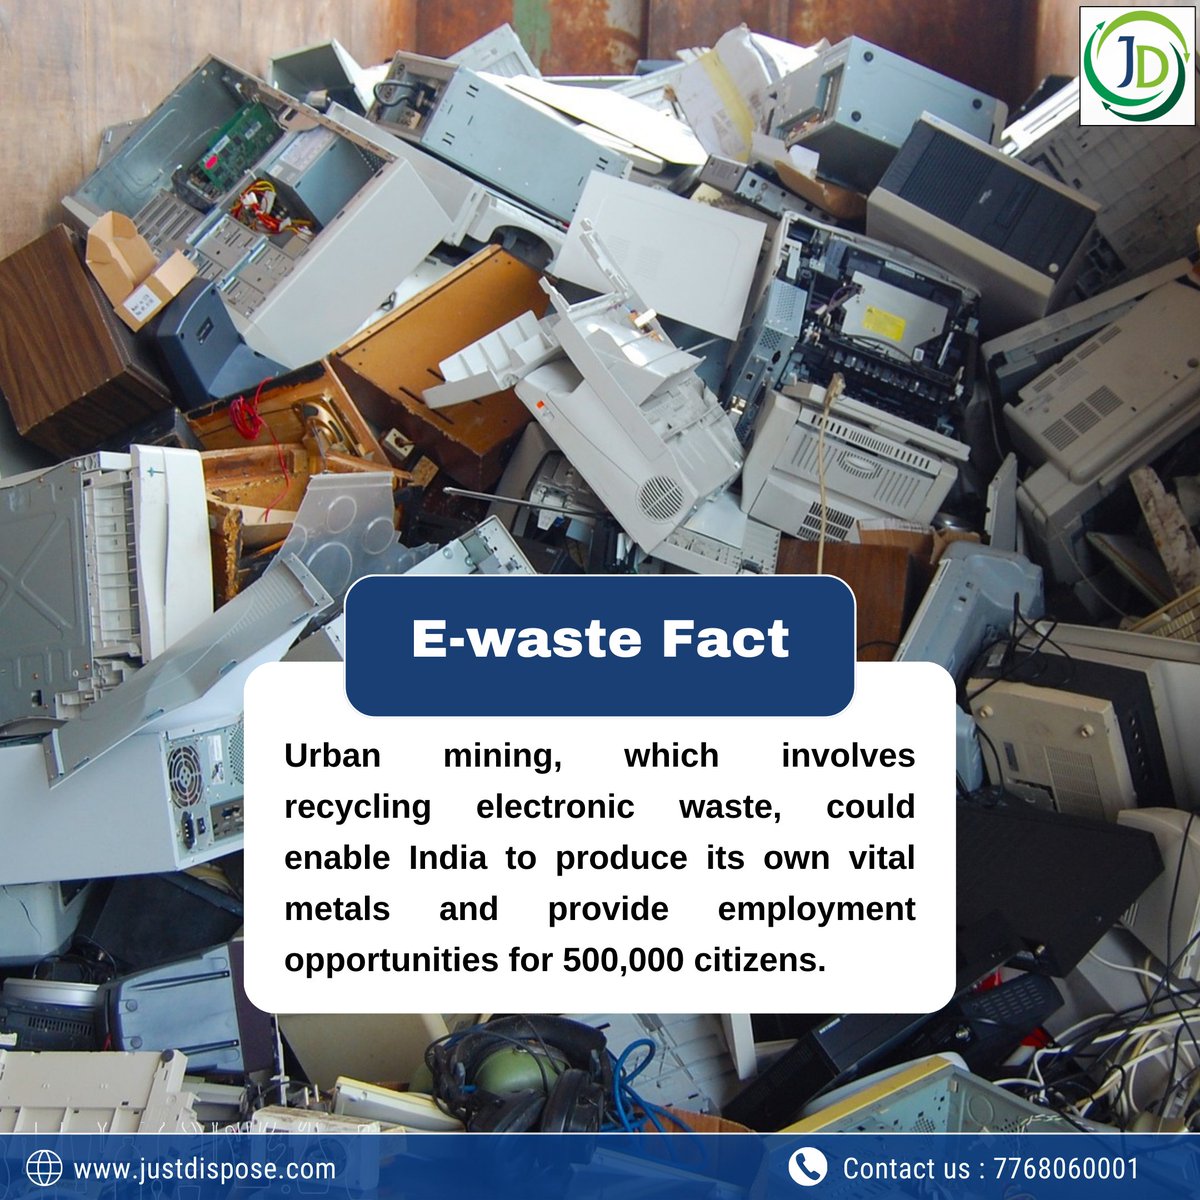 From Trash to Treasure: How Urban Mining is Changing India's Future!
Visit justdispose.com
Call Us: 7768060001
Email Us: Recycle@justdispose.com

#ewaste #recycling #escrap #electronicwaste  #industrialwaste #itrecycling  #sustainability #urbanmining #employement #fact